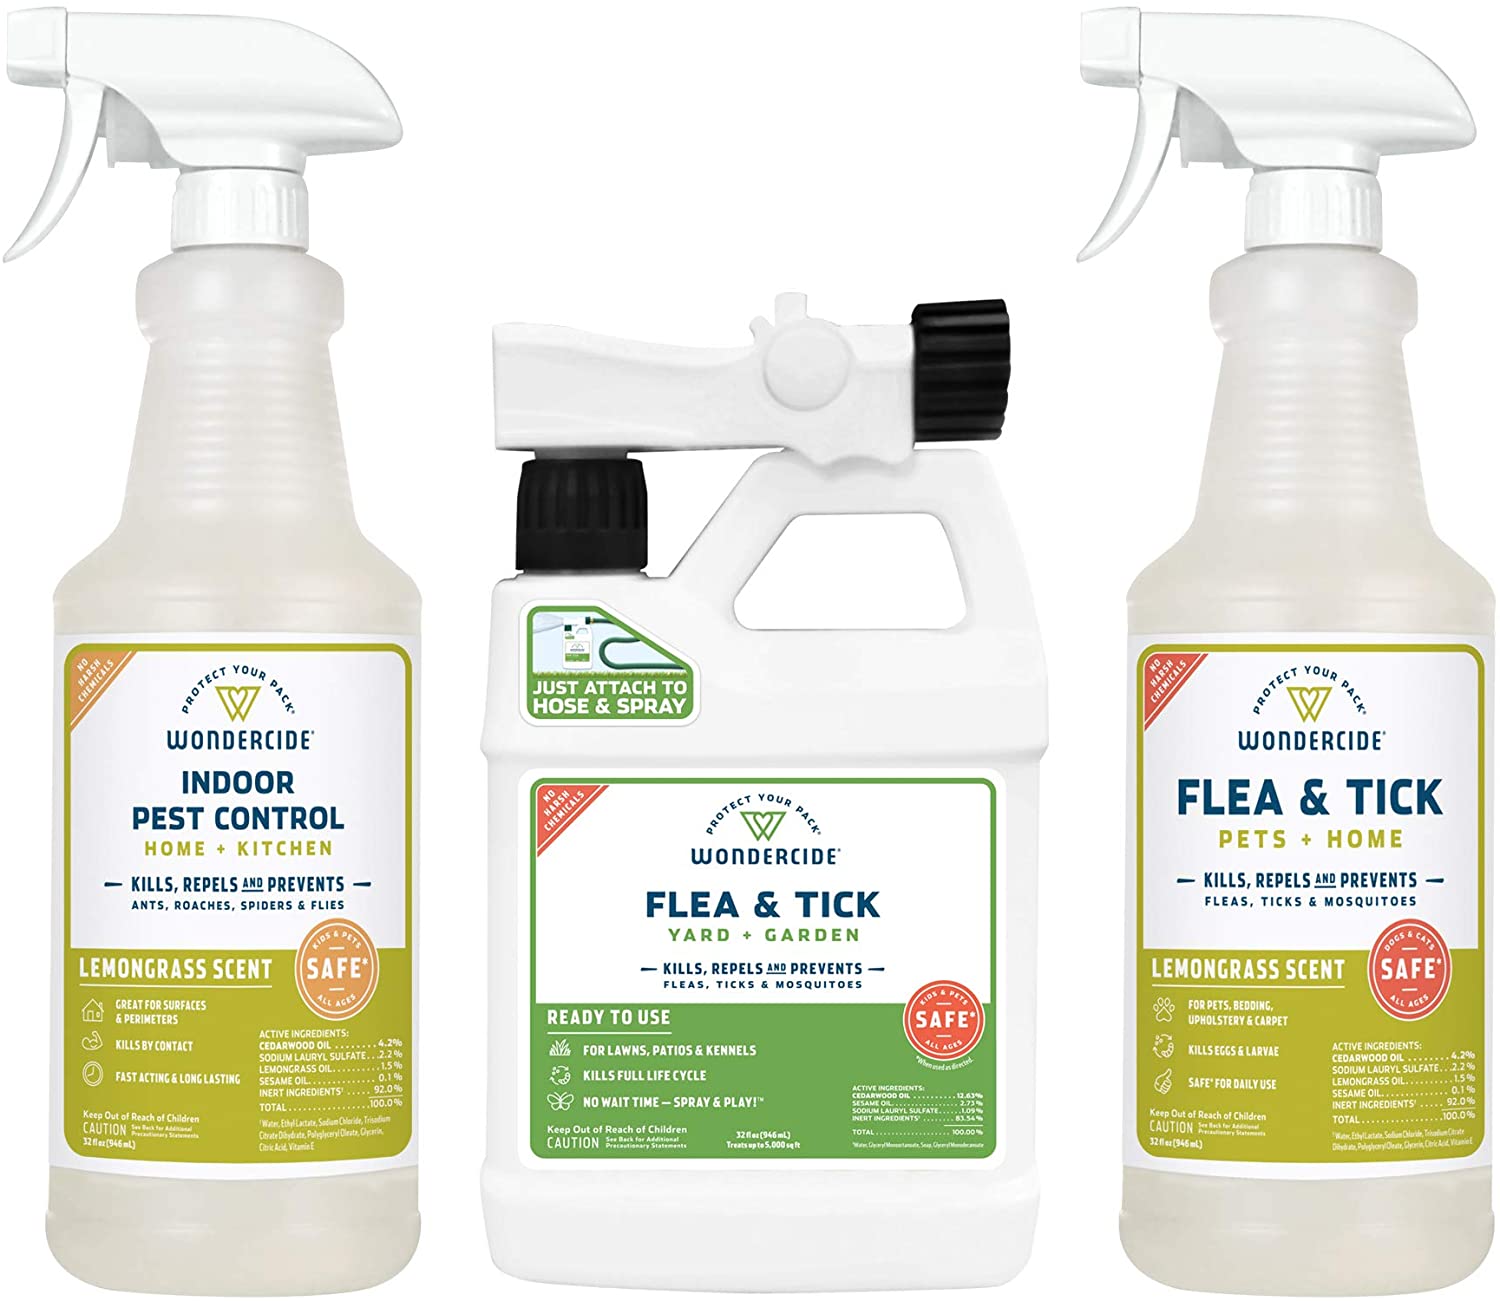 Wondercide Natural Flea Tick Insect Spray Kit for Pets, Dogs, Cats